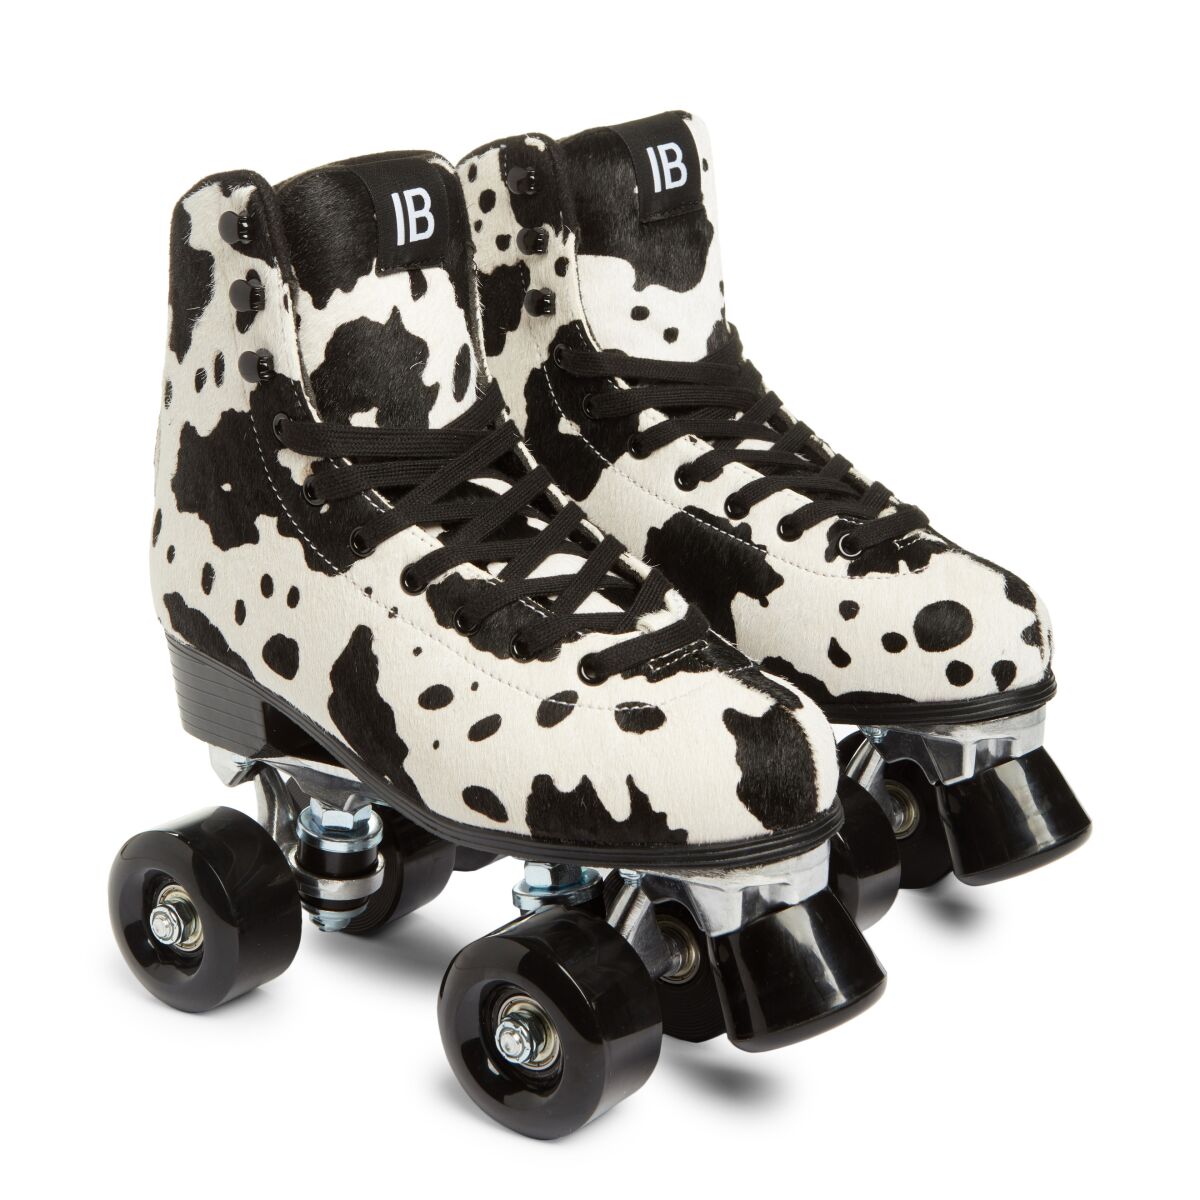 A photo of the Whip It genuine calf-hair roller skates from Intentionally Blank_.